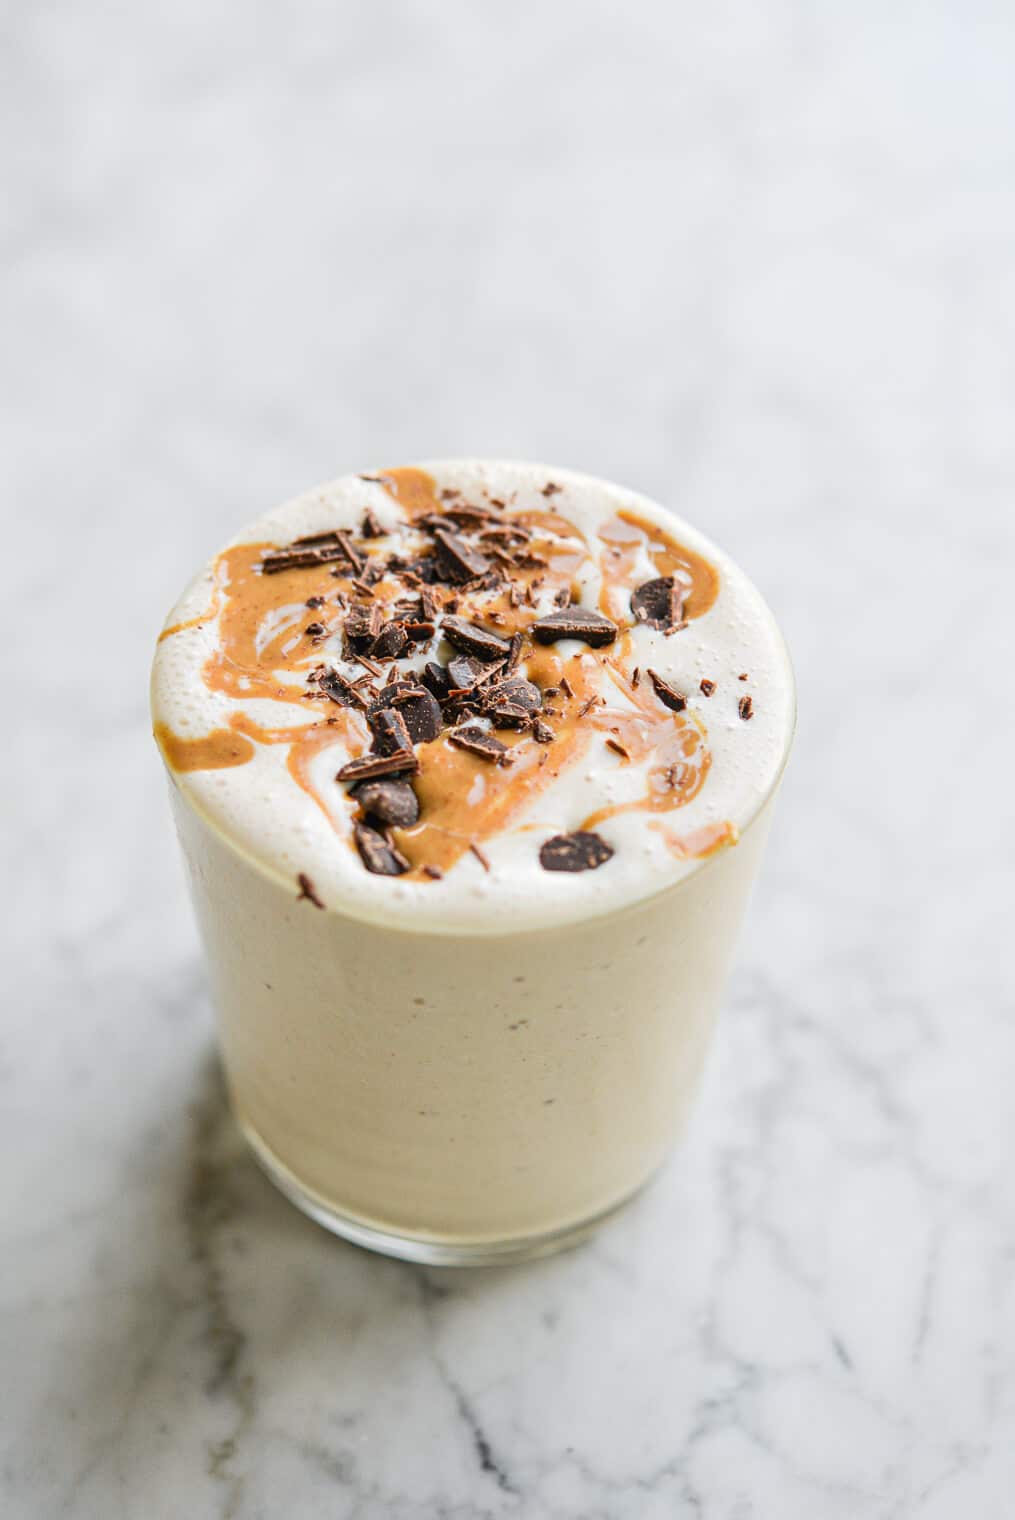 a peanut butter banana smoothie topped with peanut butter and chocolate in a glass cup on a marble surface